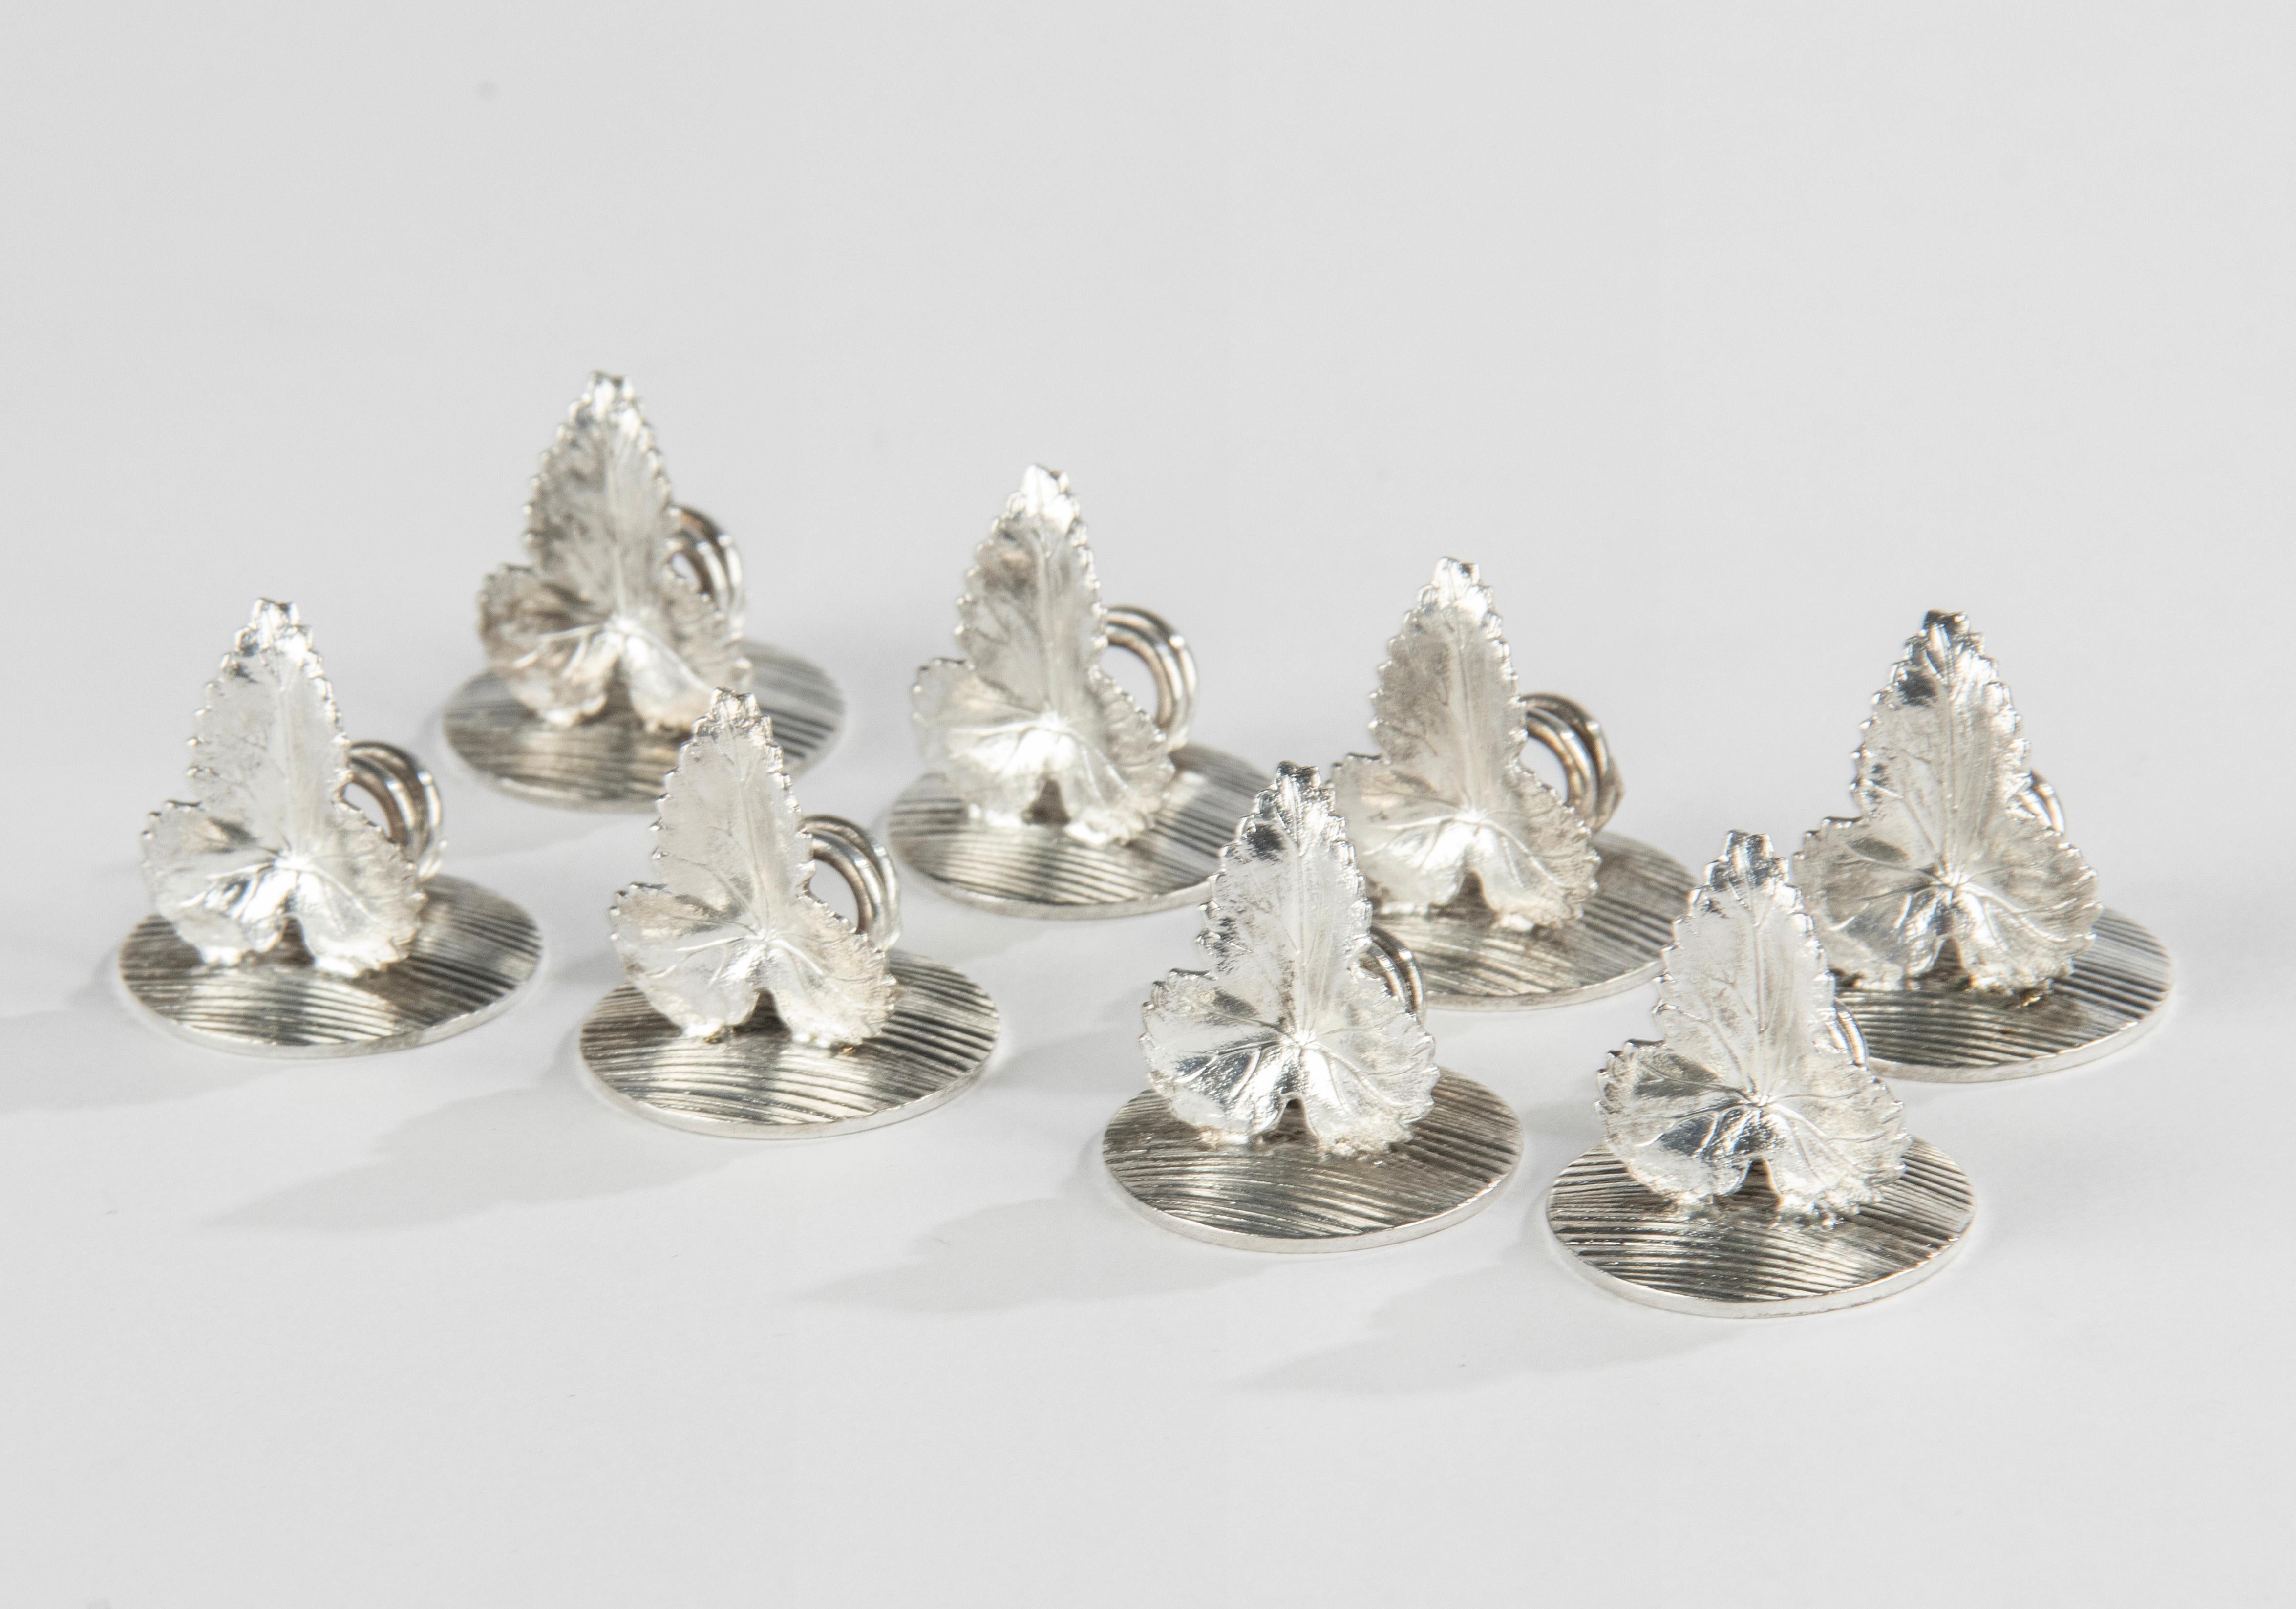 A beautiful set of 8 silver plated name card holders, made by the French manufacturer Christofle. Beautifully designed with vine leaves.
They are small stands, 3 cm high and Ø3 cm.
The holders come in an original Christofle box. The set is in good